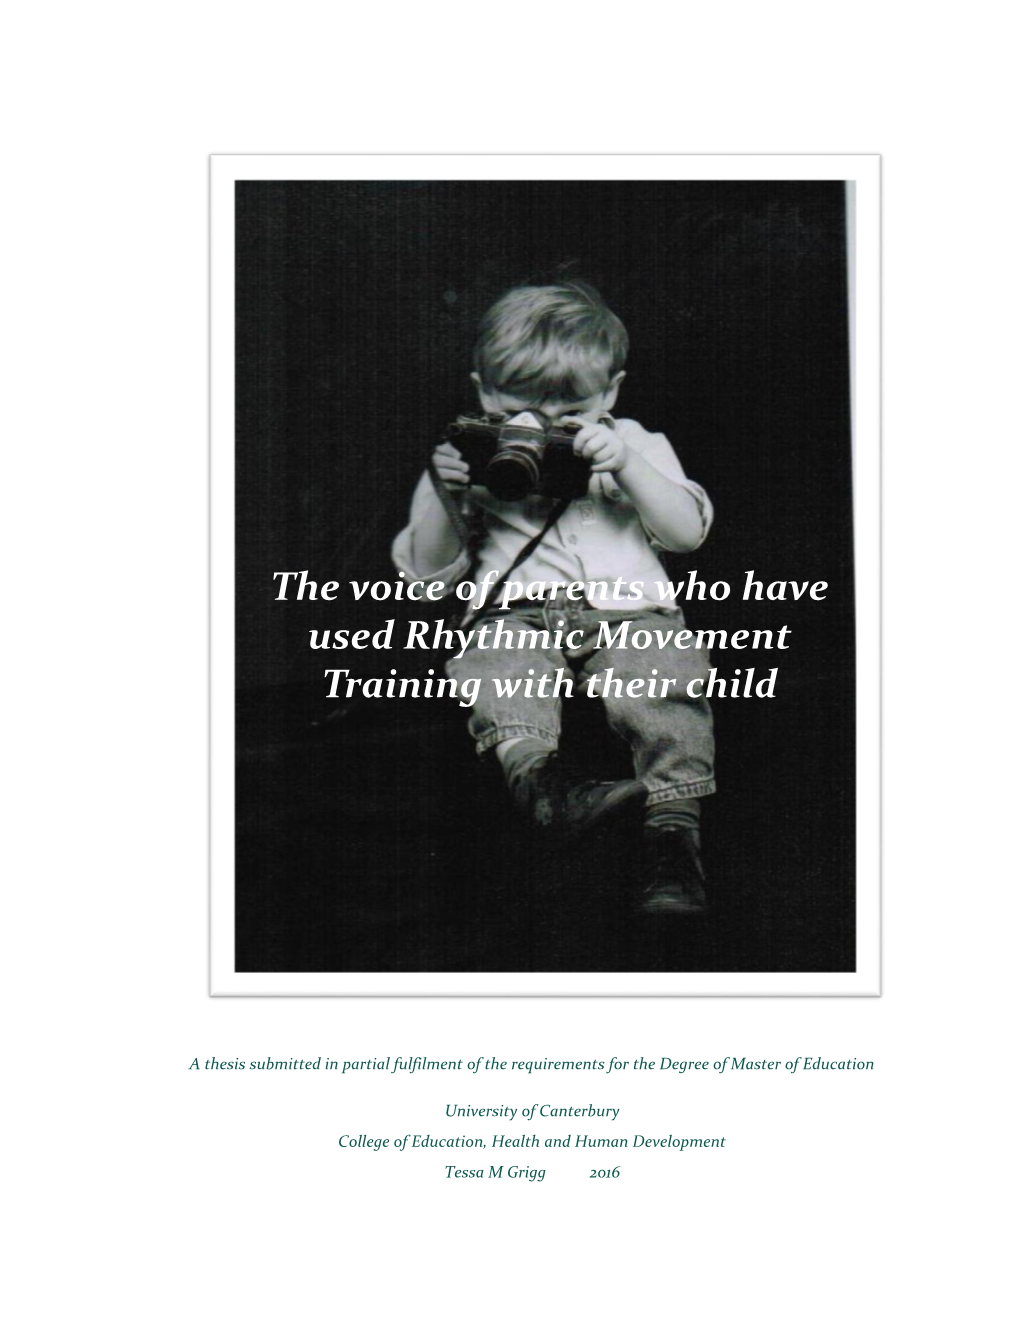 The Voice of Parents Who Have Used Rhythmic Movement Training with Their Child